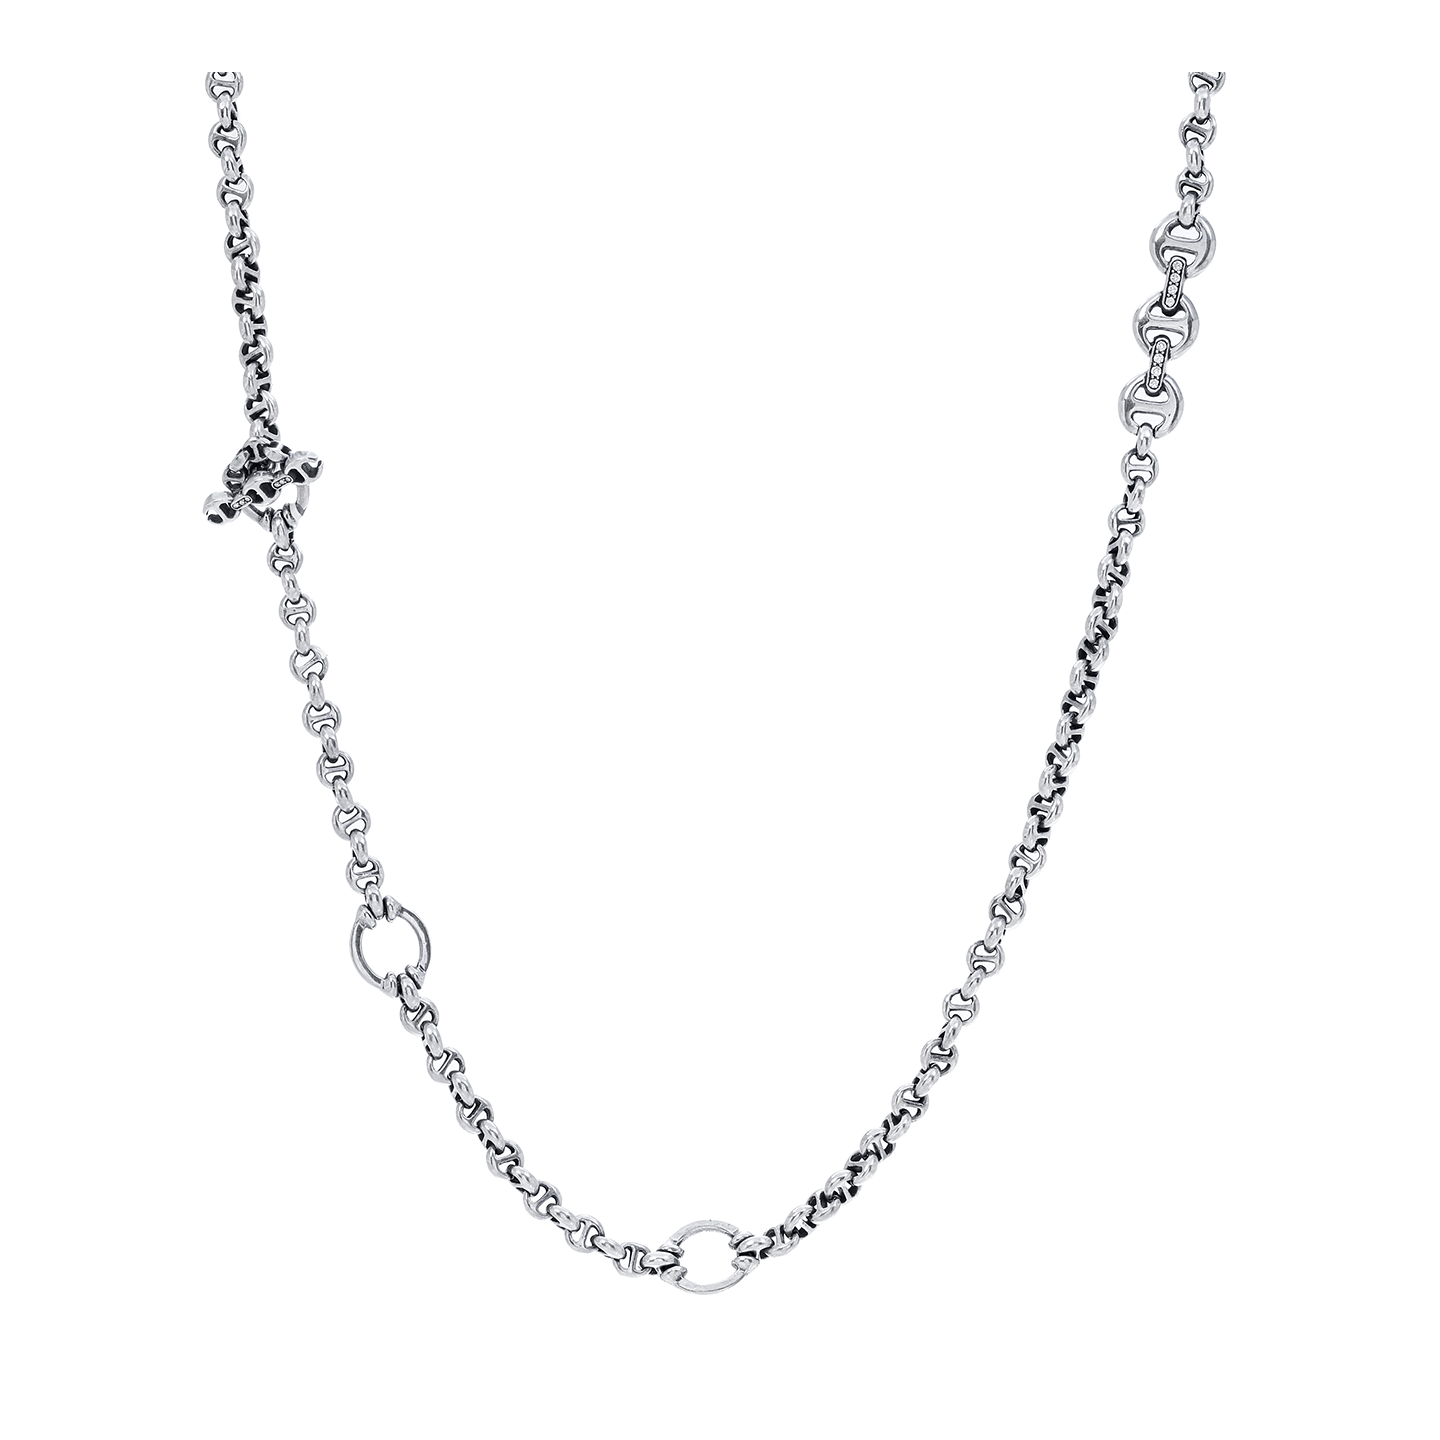 Hoorsenbuhs 5MM Open Link Necklace With Diamond Pendant and Toggle